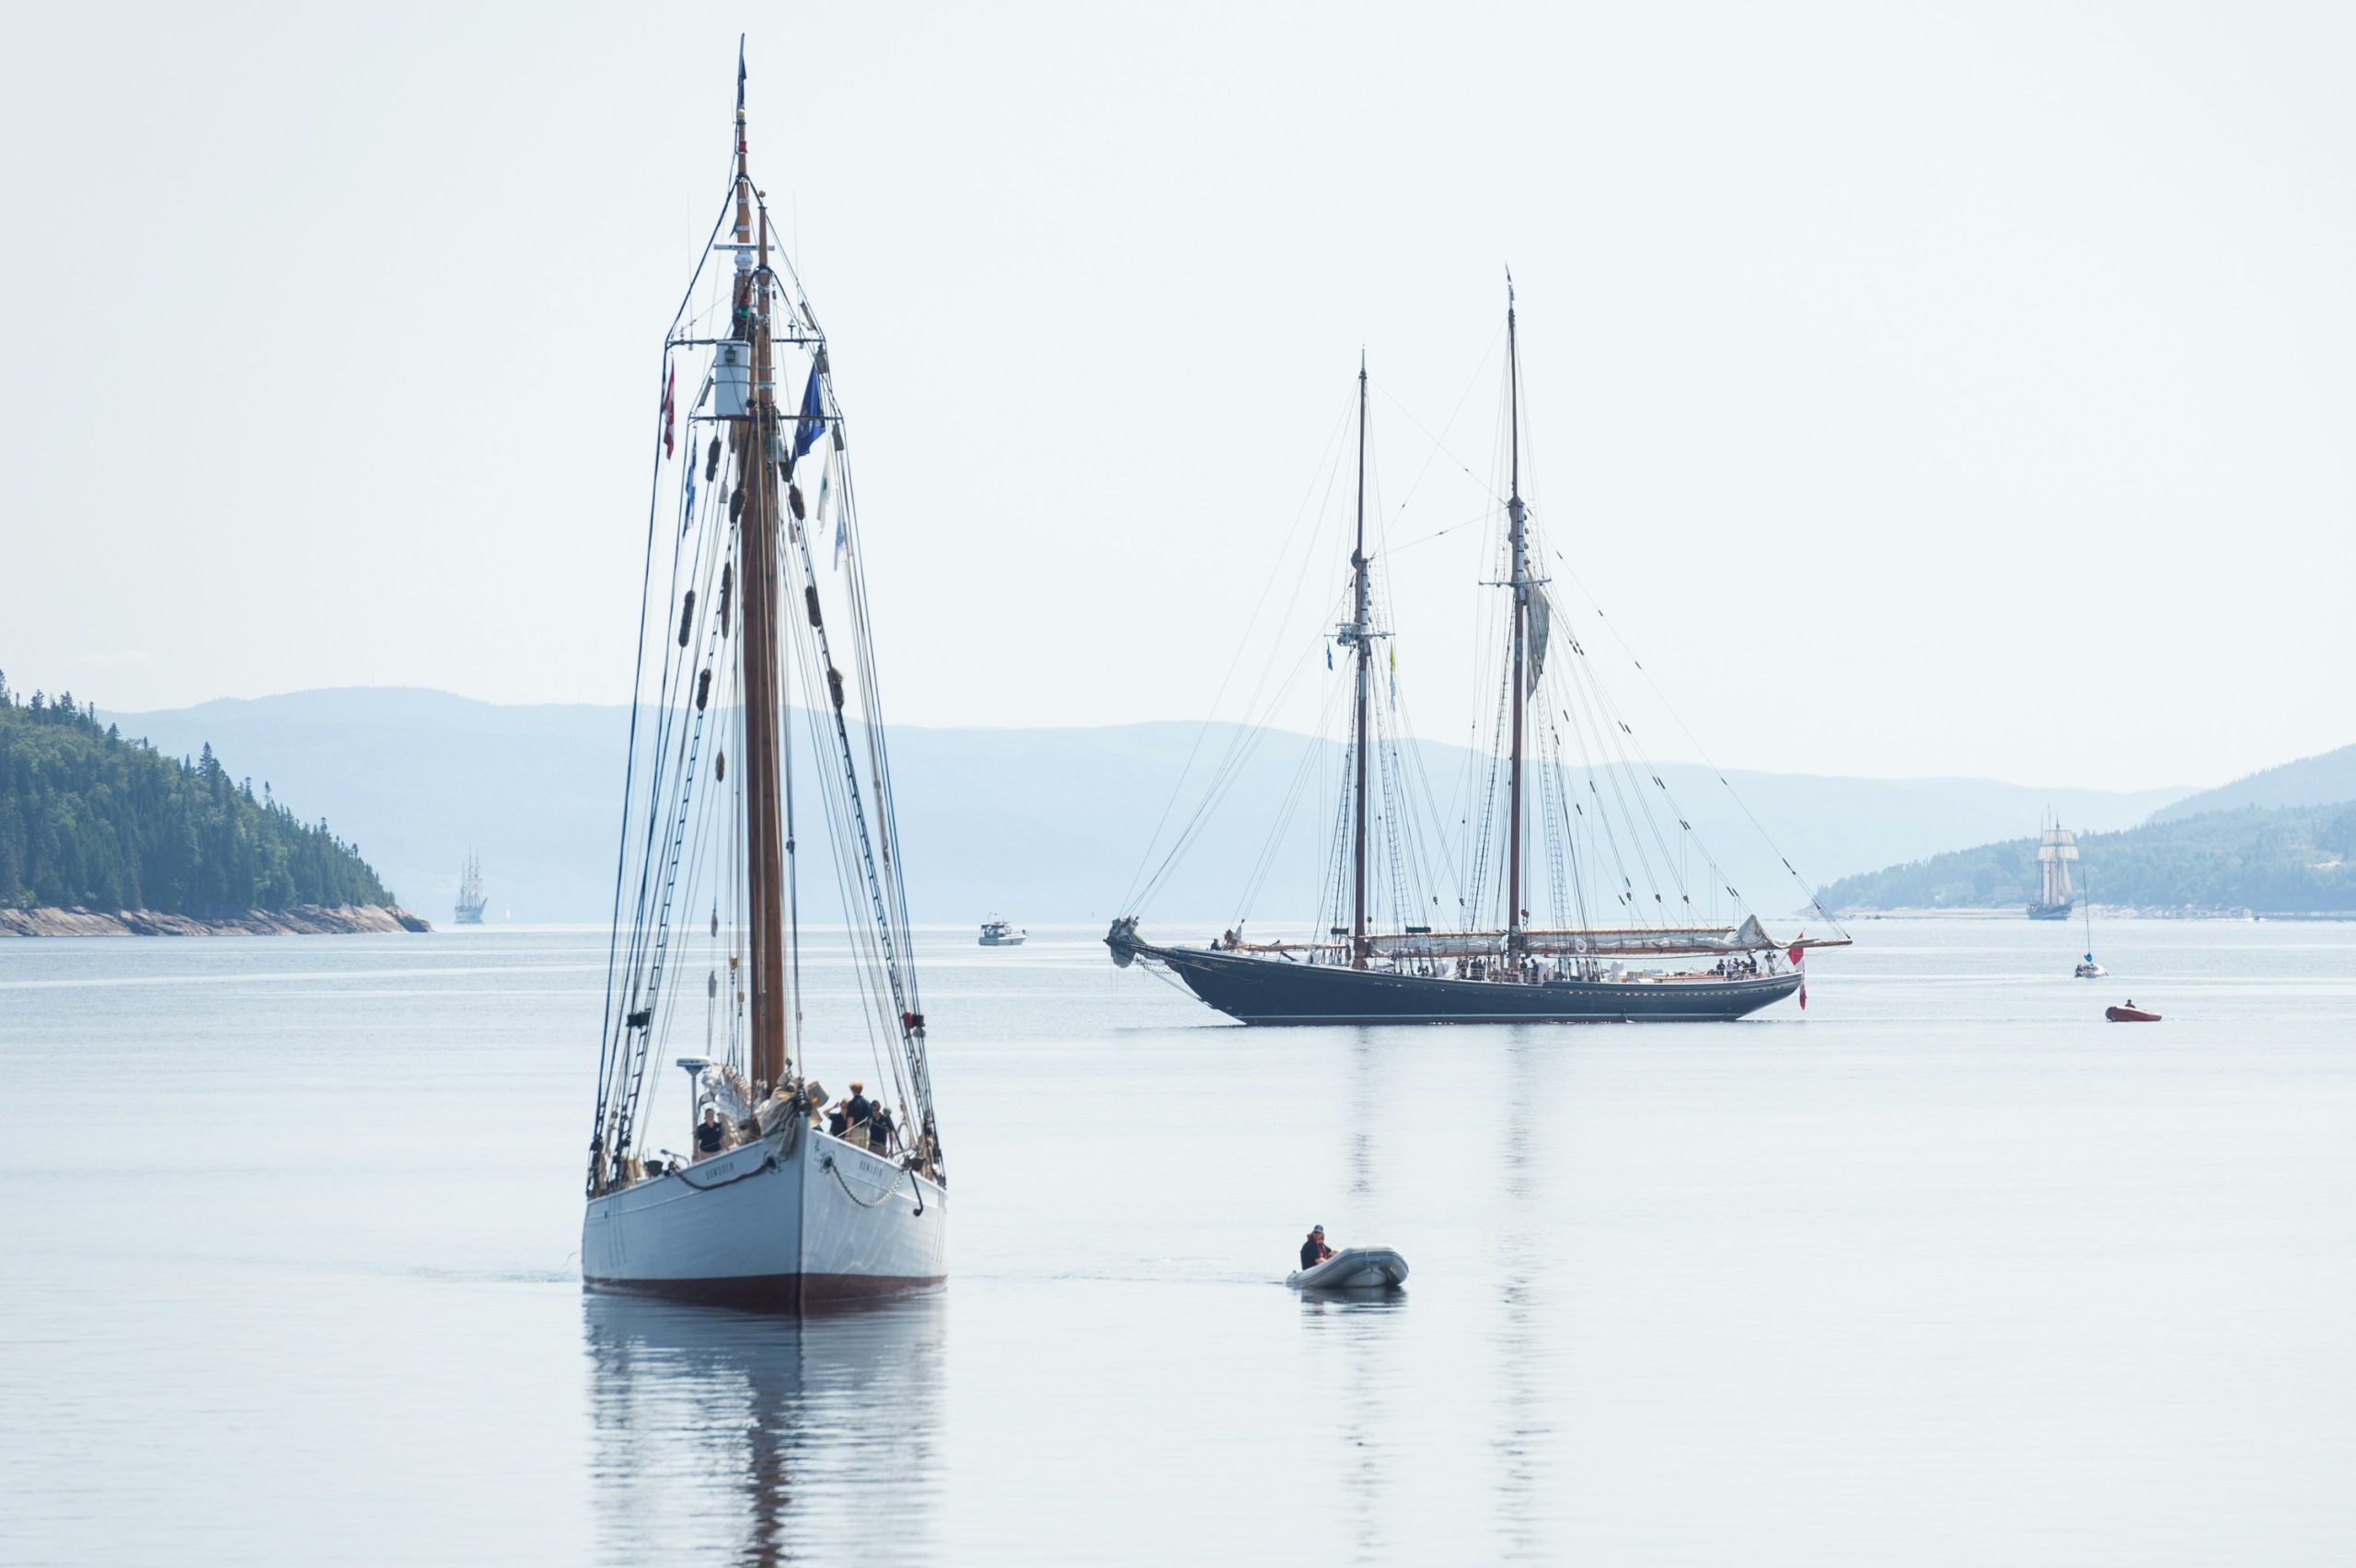 embark on a thrilling sailing adventure and explore the open seas with our guide to unforgettable maritime journeys.